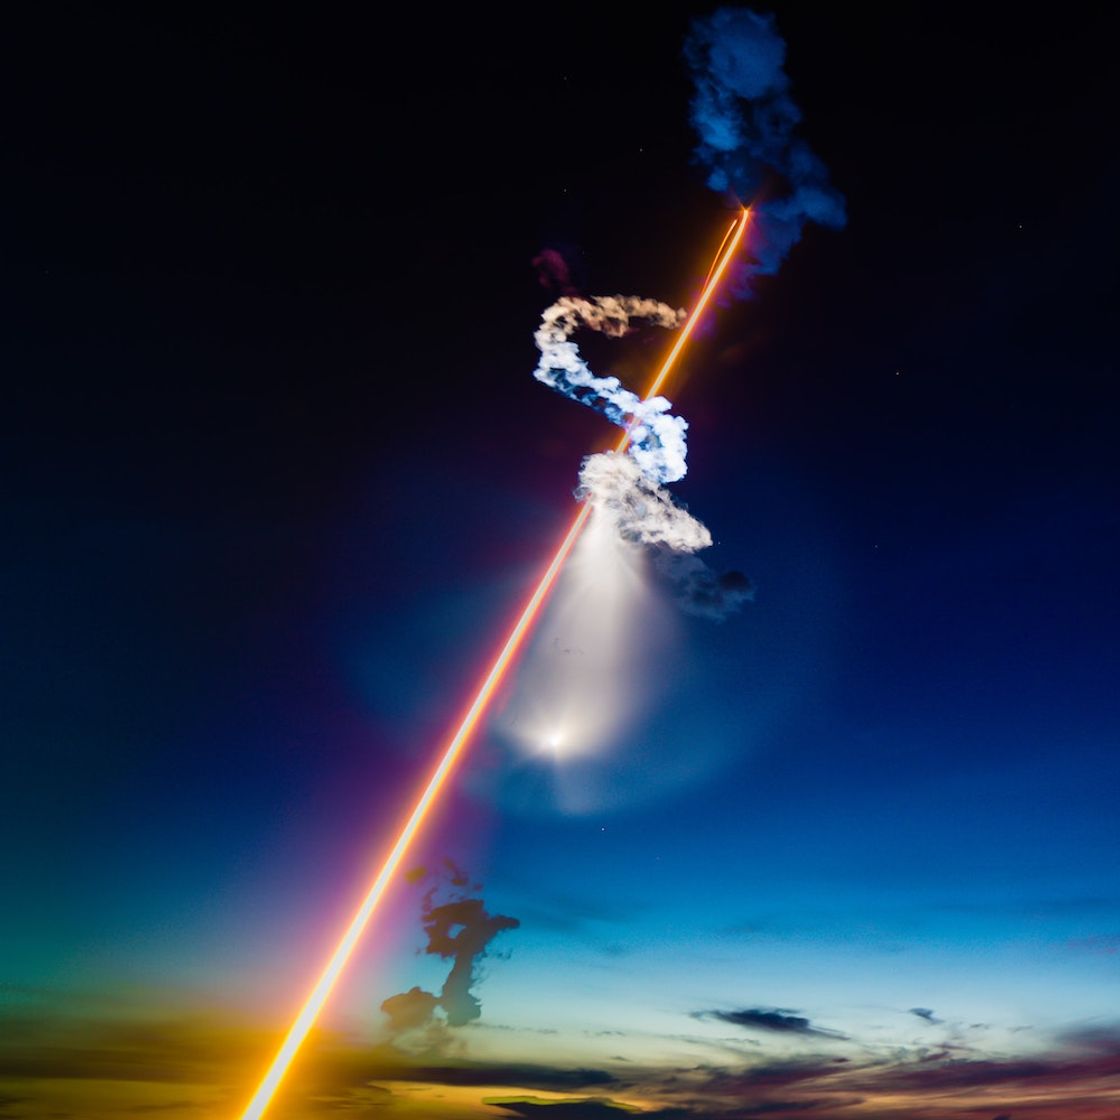 A rocket launching into space at fast speeds